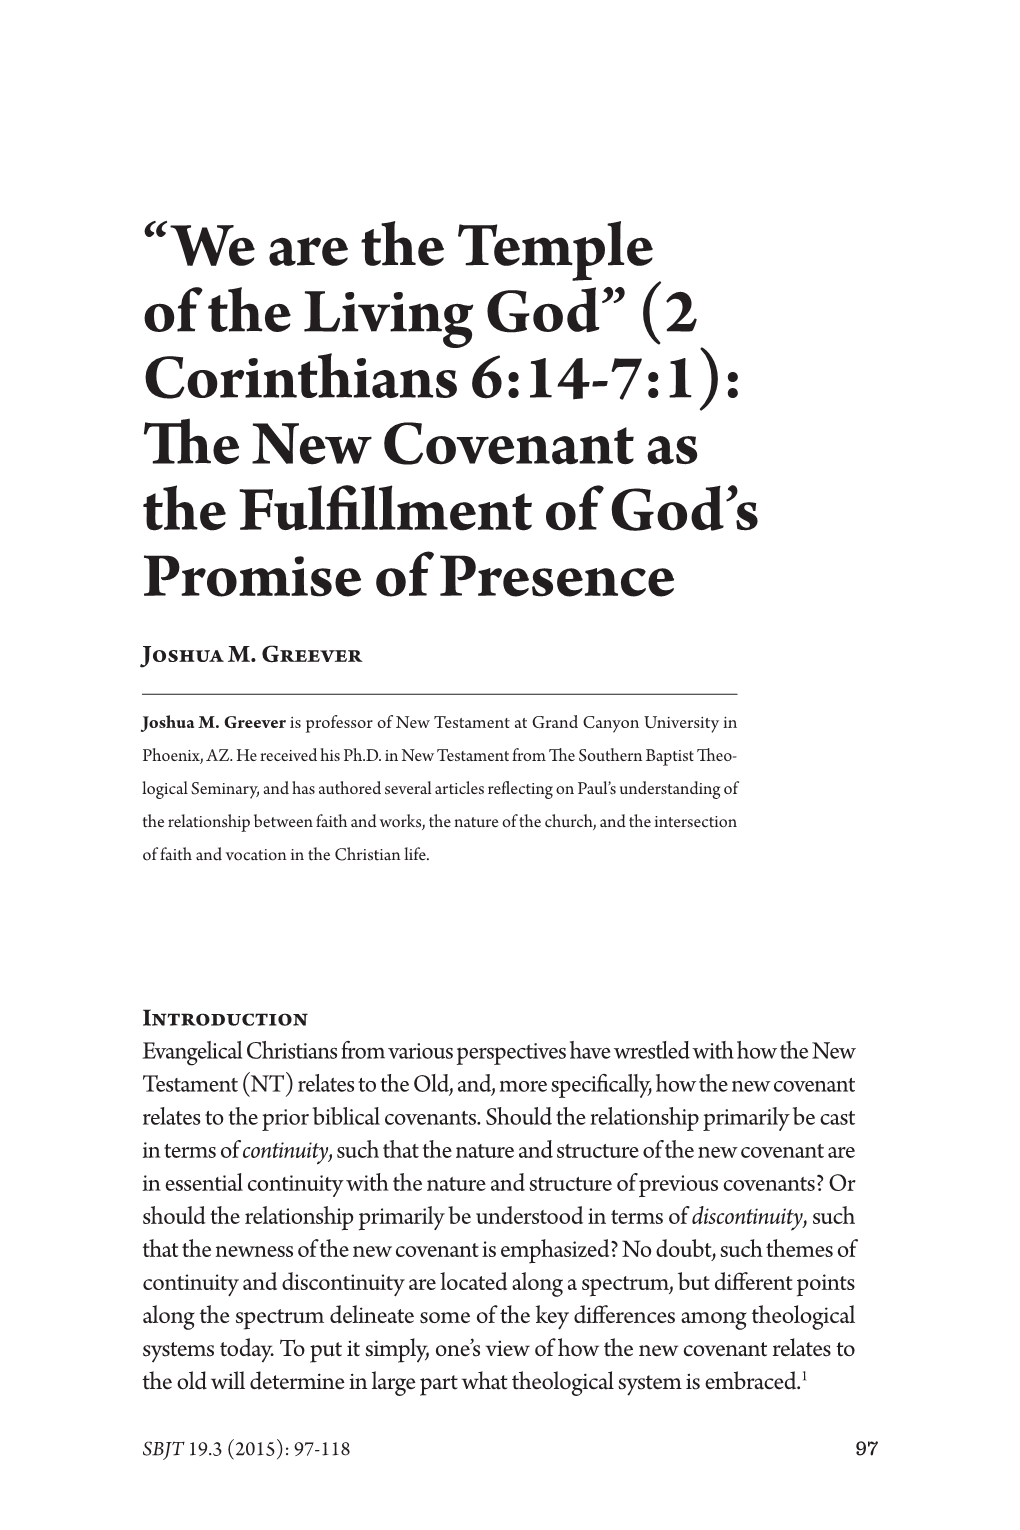 “We Are the Temple of the Living God” (2 Corinthians 6:14-7:1): the New Covenant As the Fulfillment of God’S Promise of Presence Joshua M